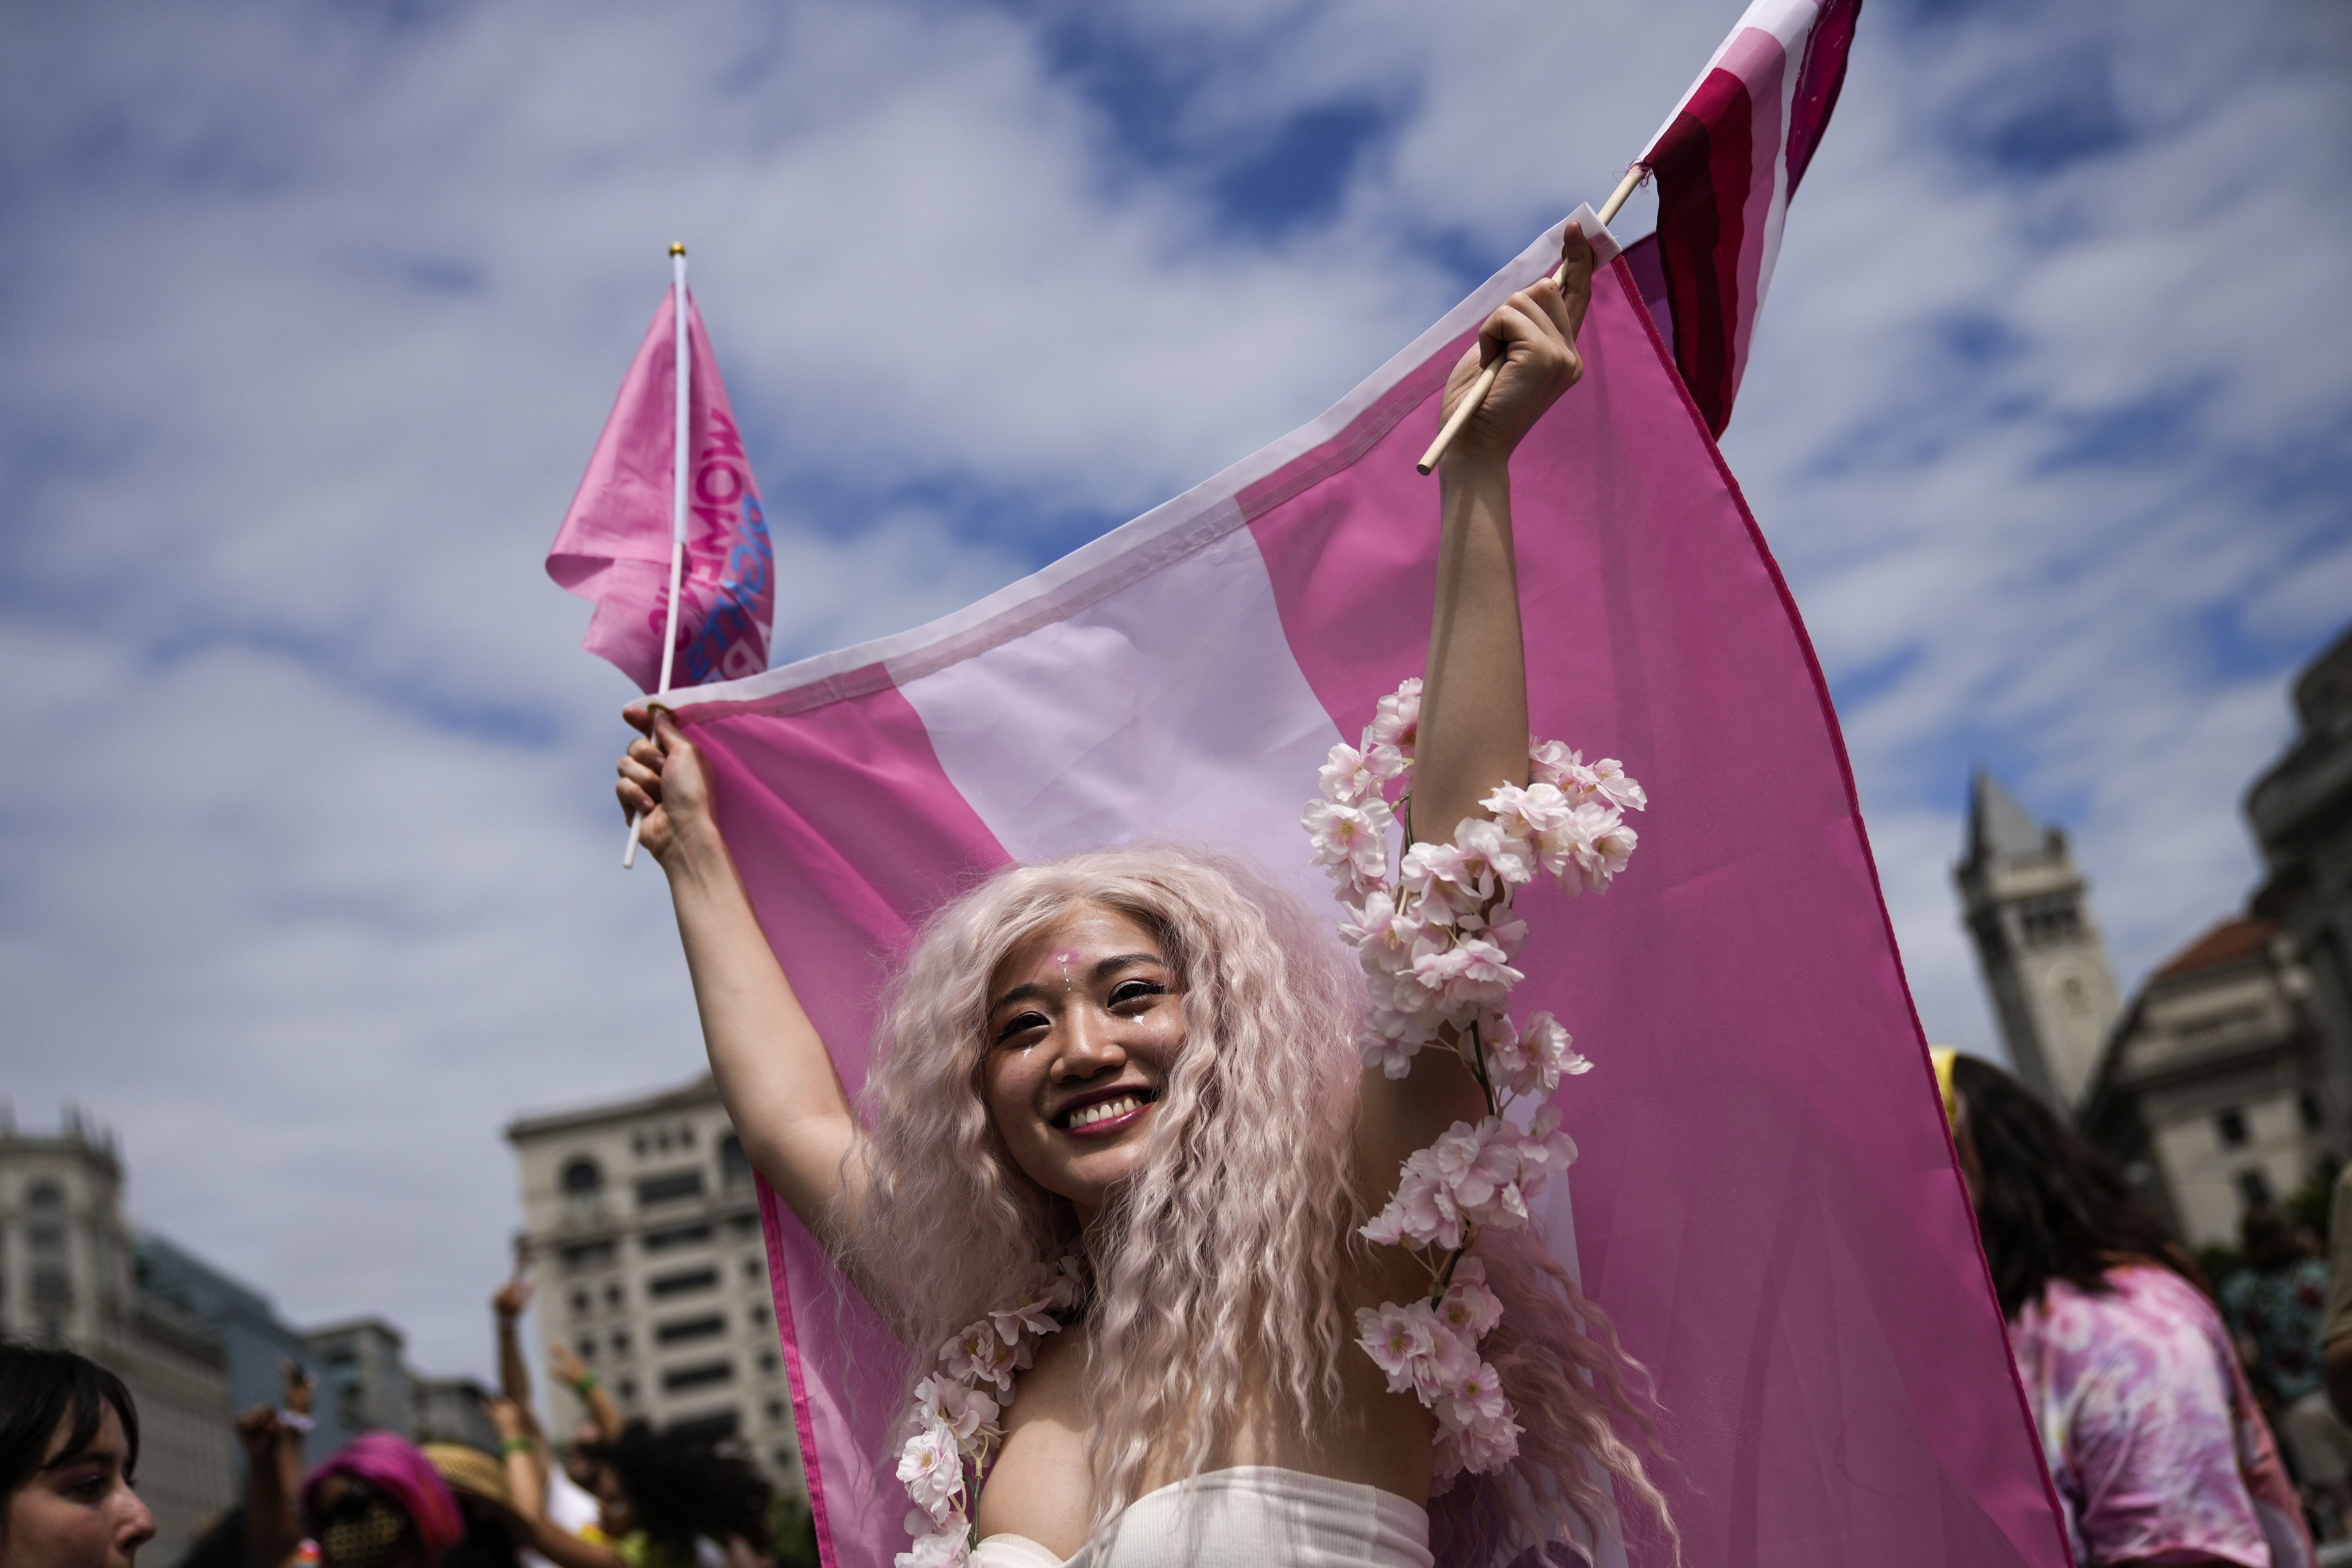 Photo of a person with pink hair and flowers wrapped around them, holding up a flag with three stripes (2 dark pink stripes and 1 light pink stripe) 